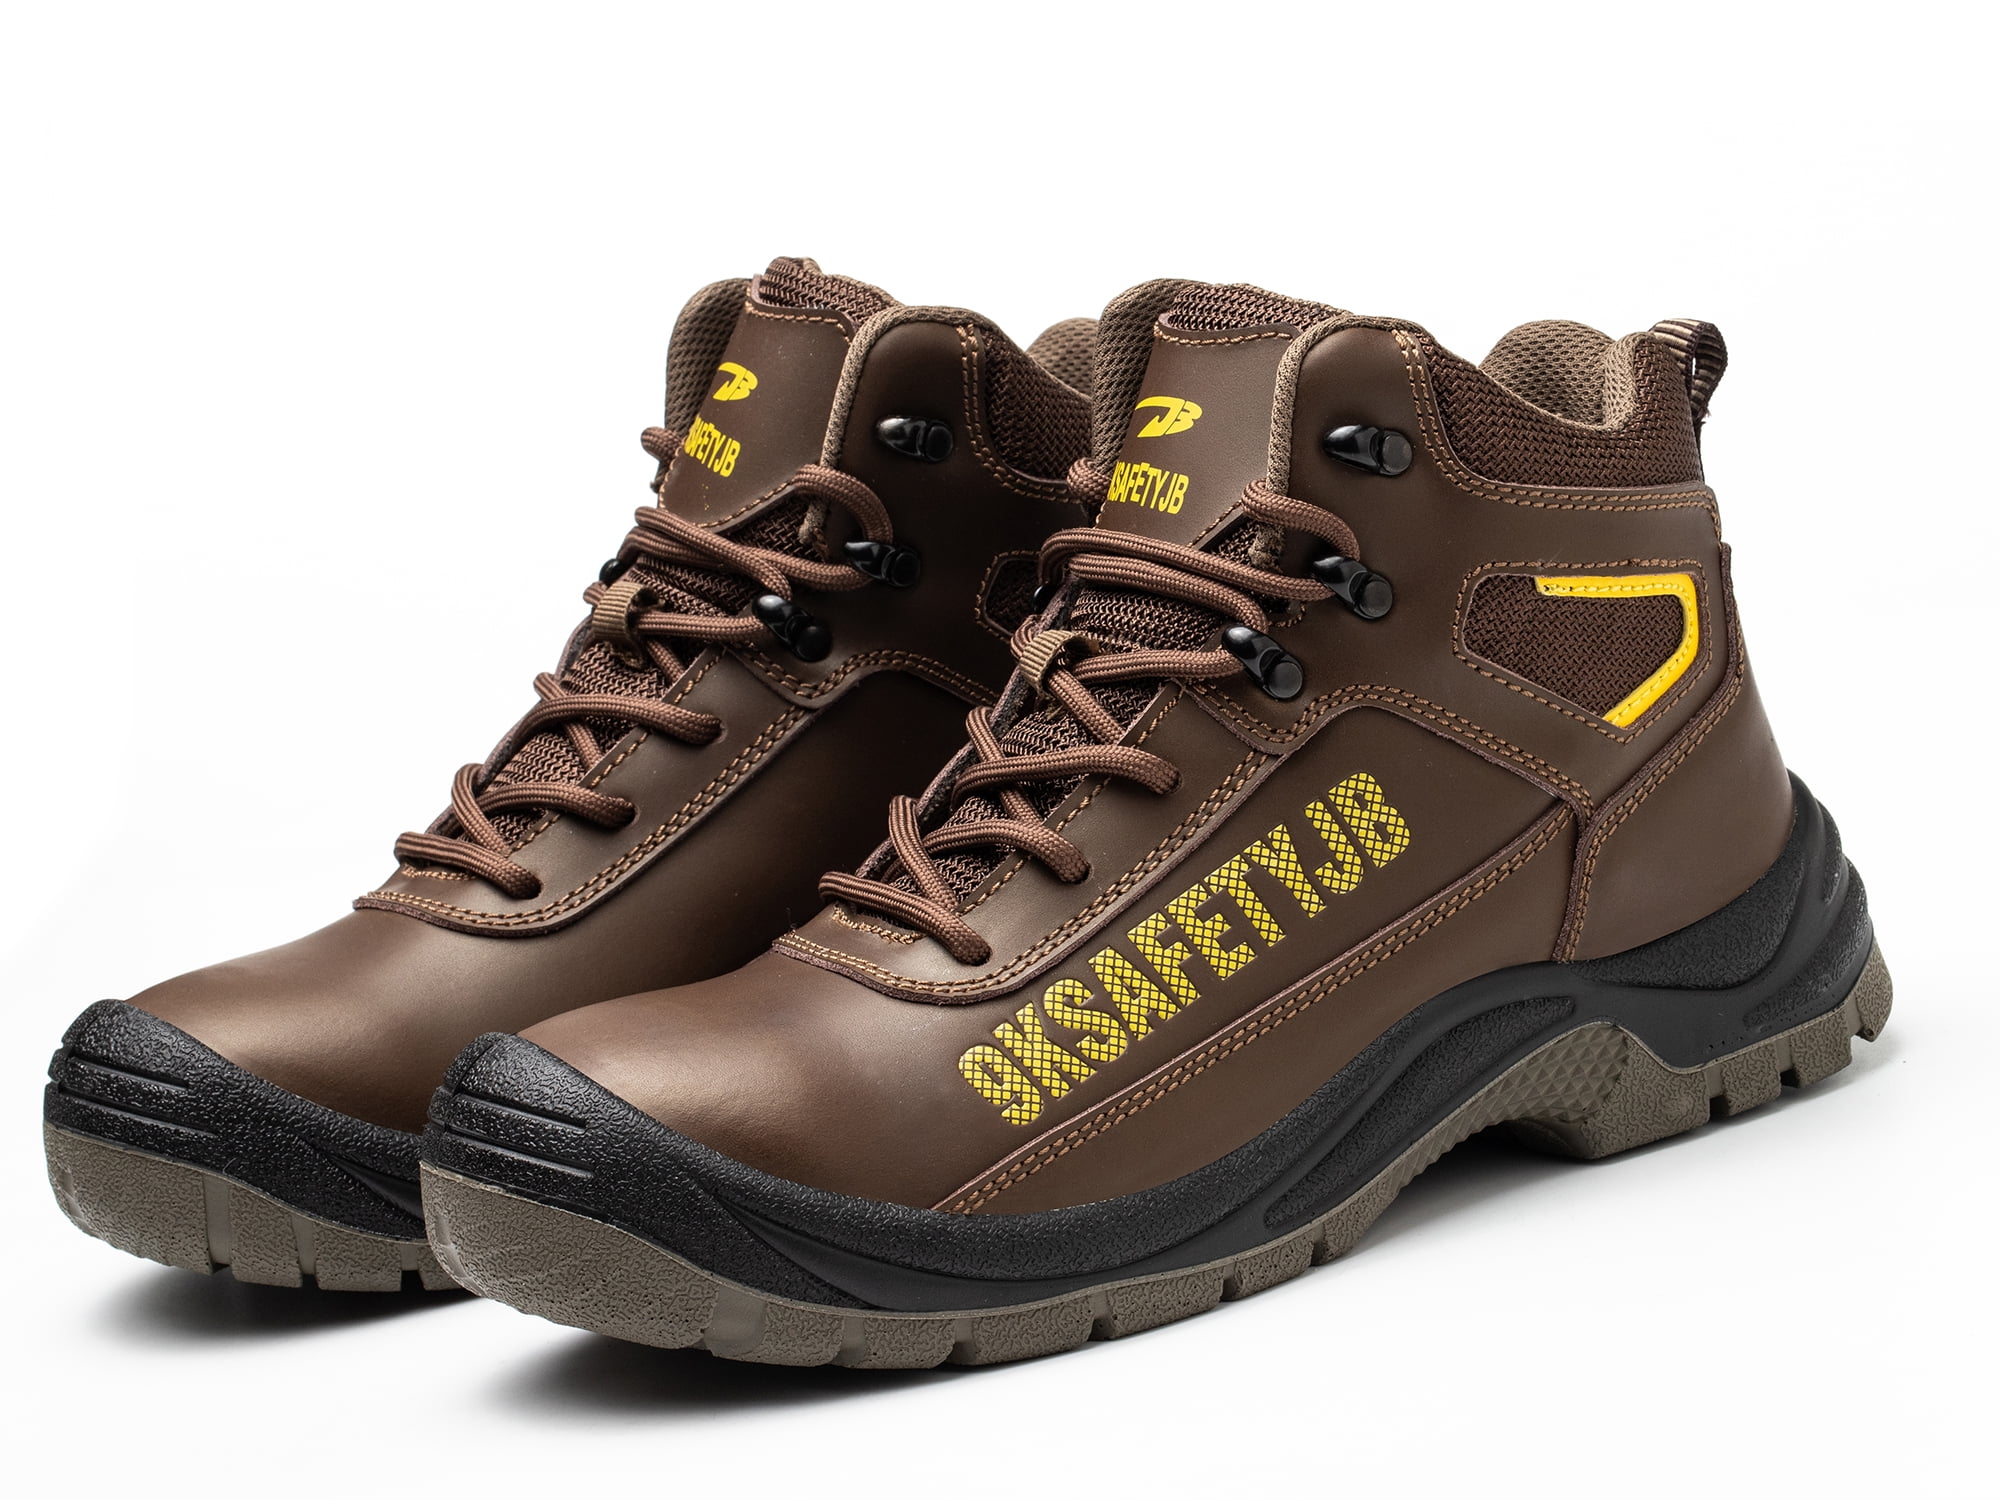 Men's Work Safety Shoes Steel Toe Boots Indestructible Outdoor Non-Slip Sneakers 